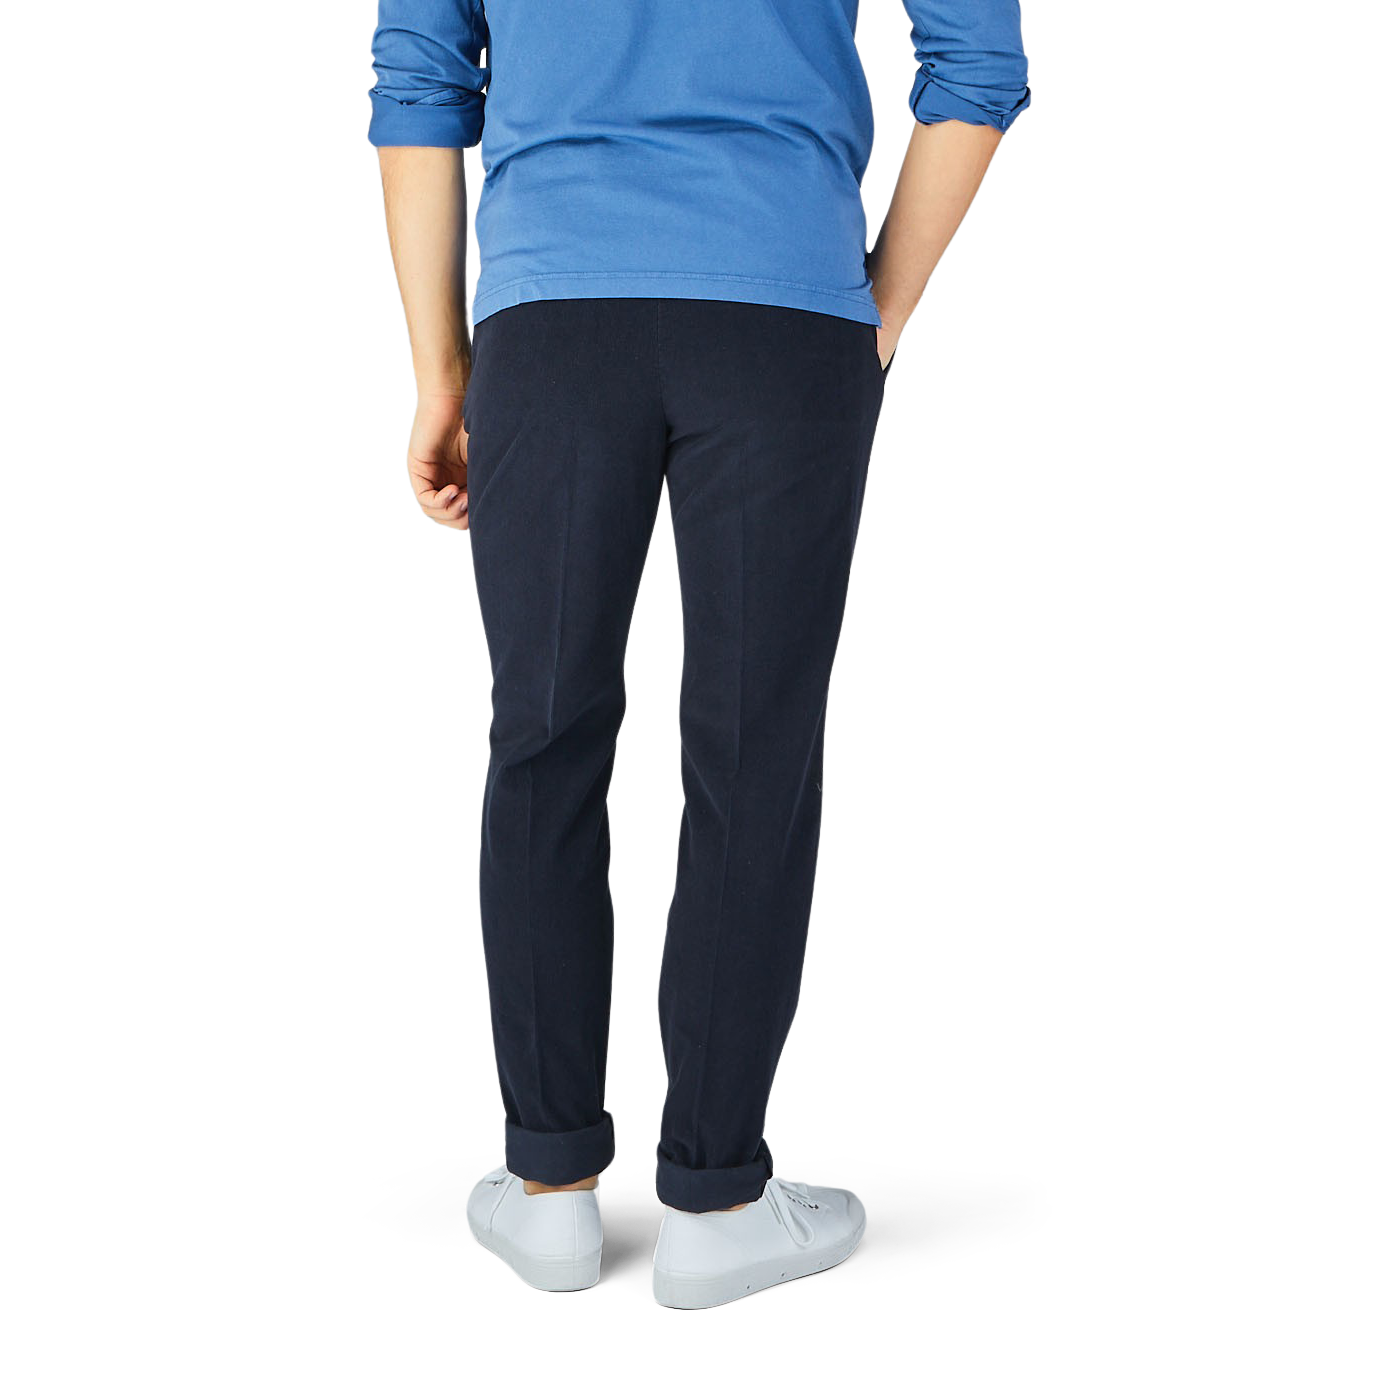 The man is wearing Incotex Blue Micro Cotton Corduroy High Comfort Chinos and a blue shirt, with a slim fit.